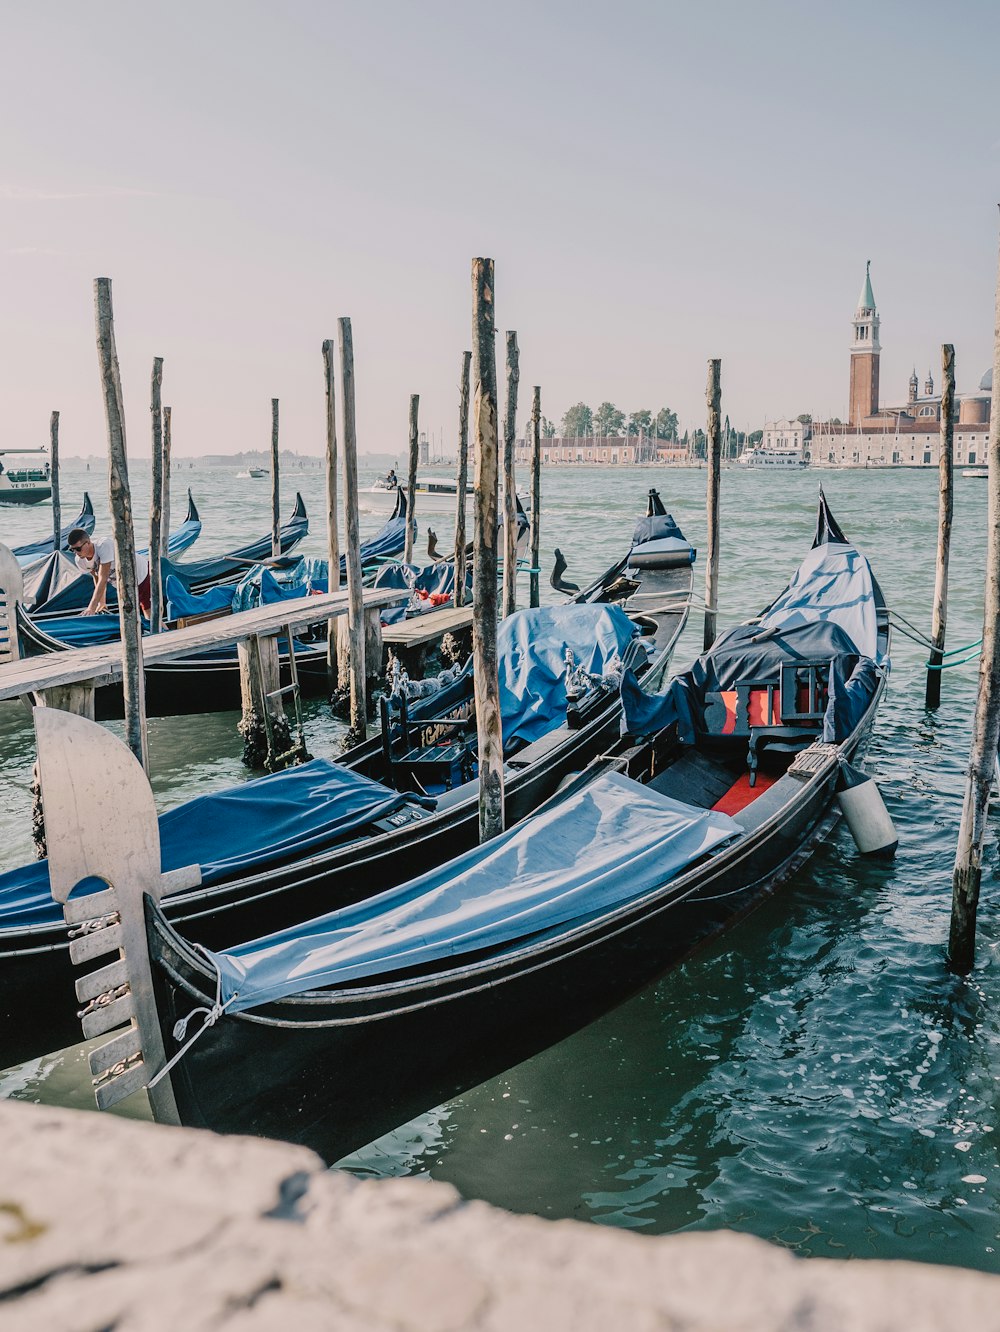 a row of gondolas sitting next to each other in a body of water